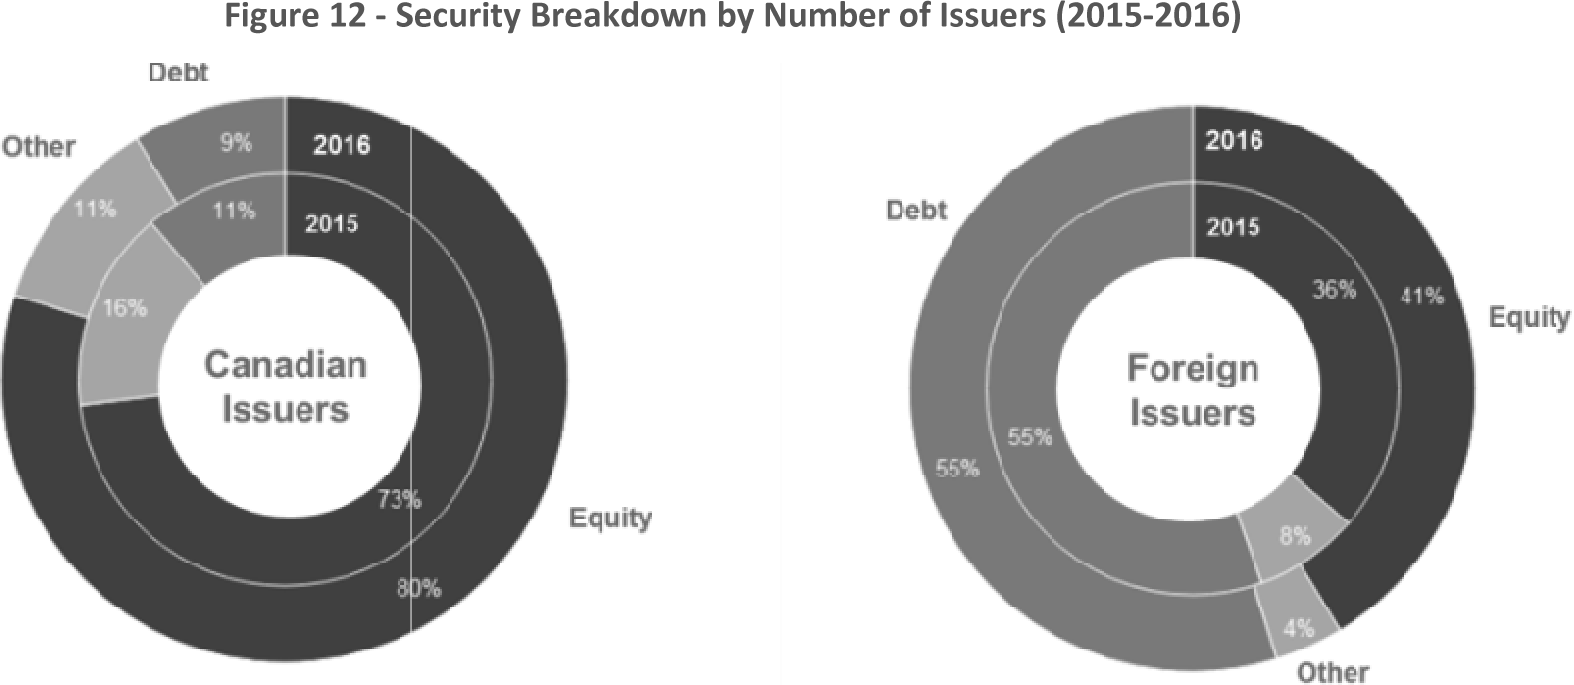 Figure 12 -- Security Breakdown by Number of Issuers (2015-2016)